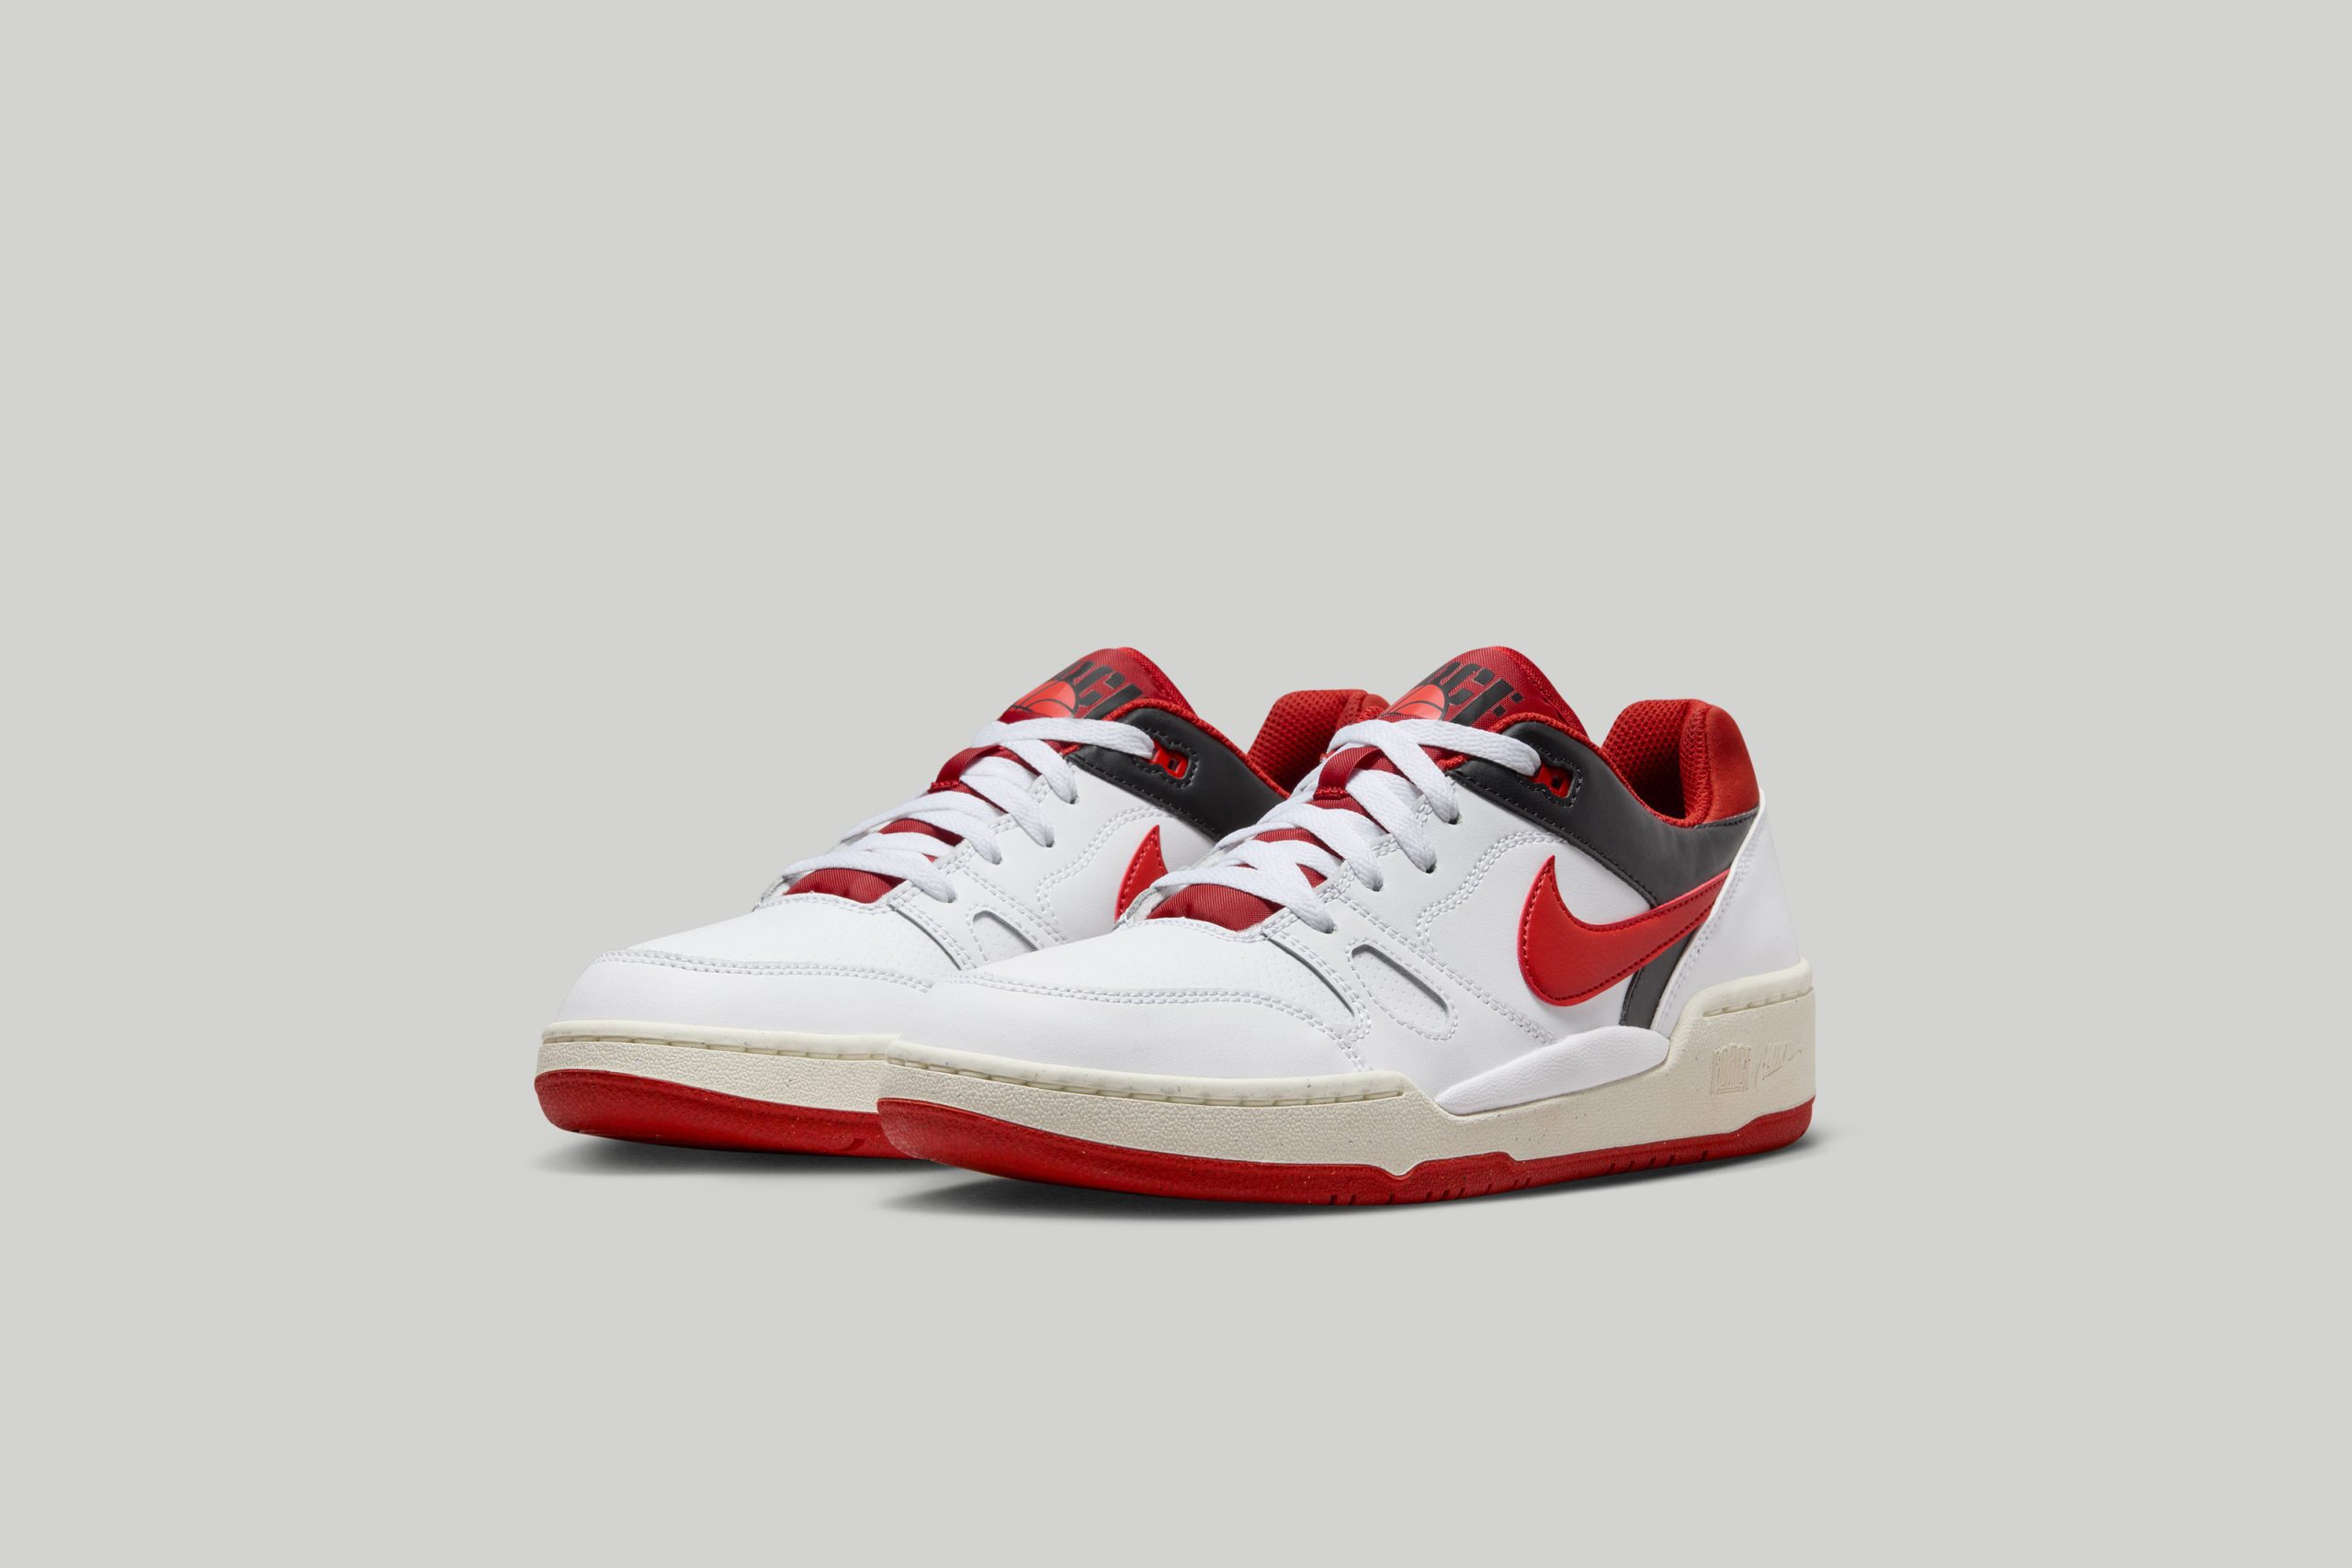 Nike Full Force Low "University Red"